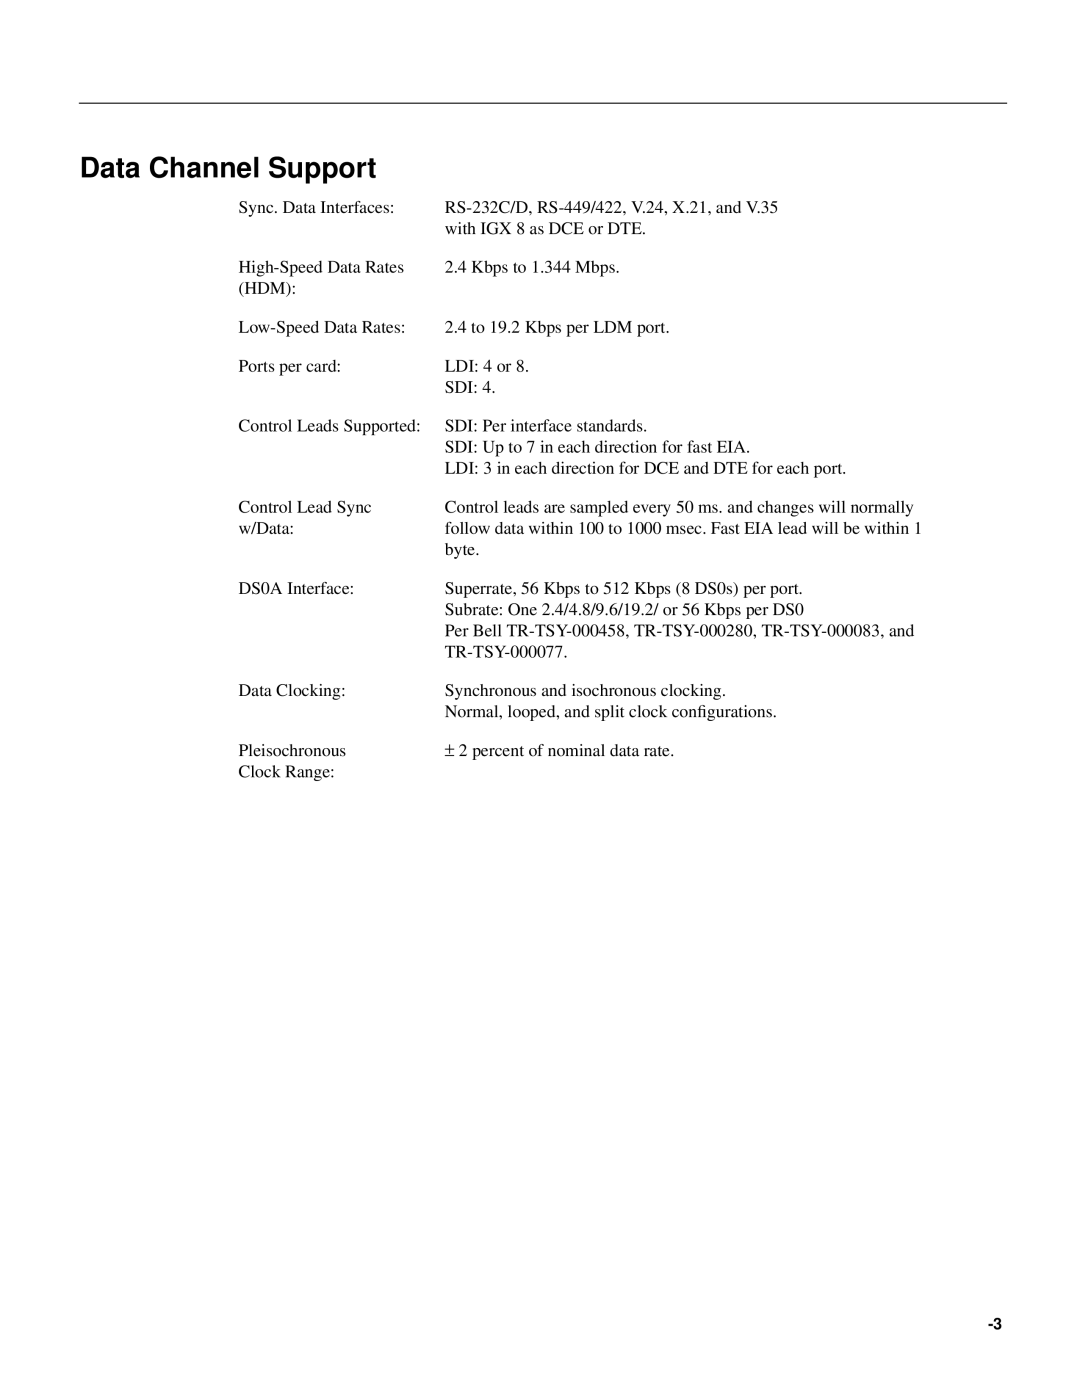 Cisco Systems IGX 8 appendix Data Channel Support 